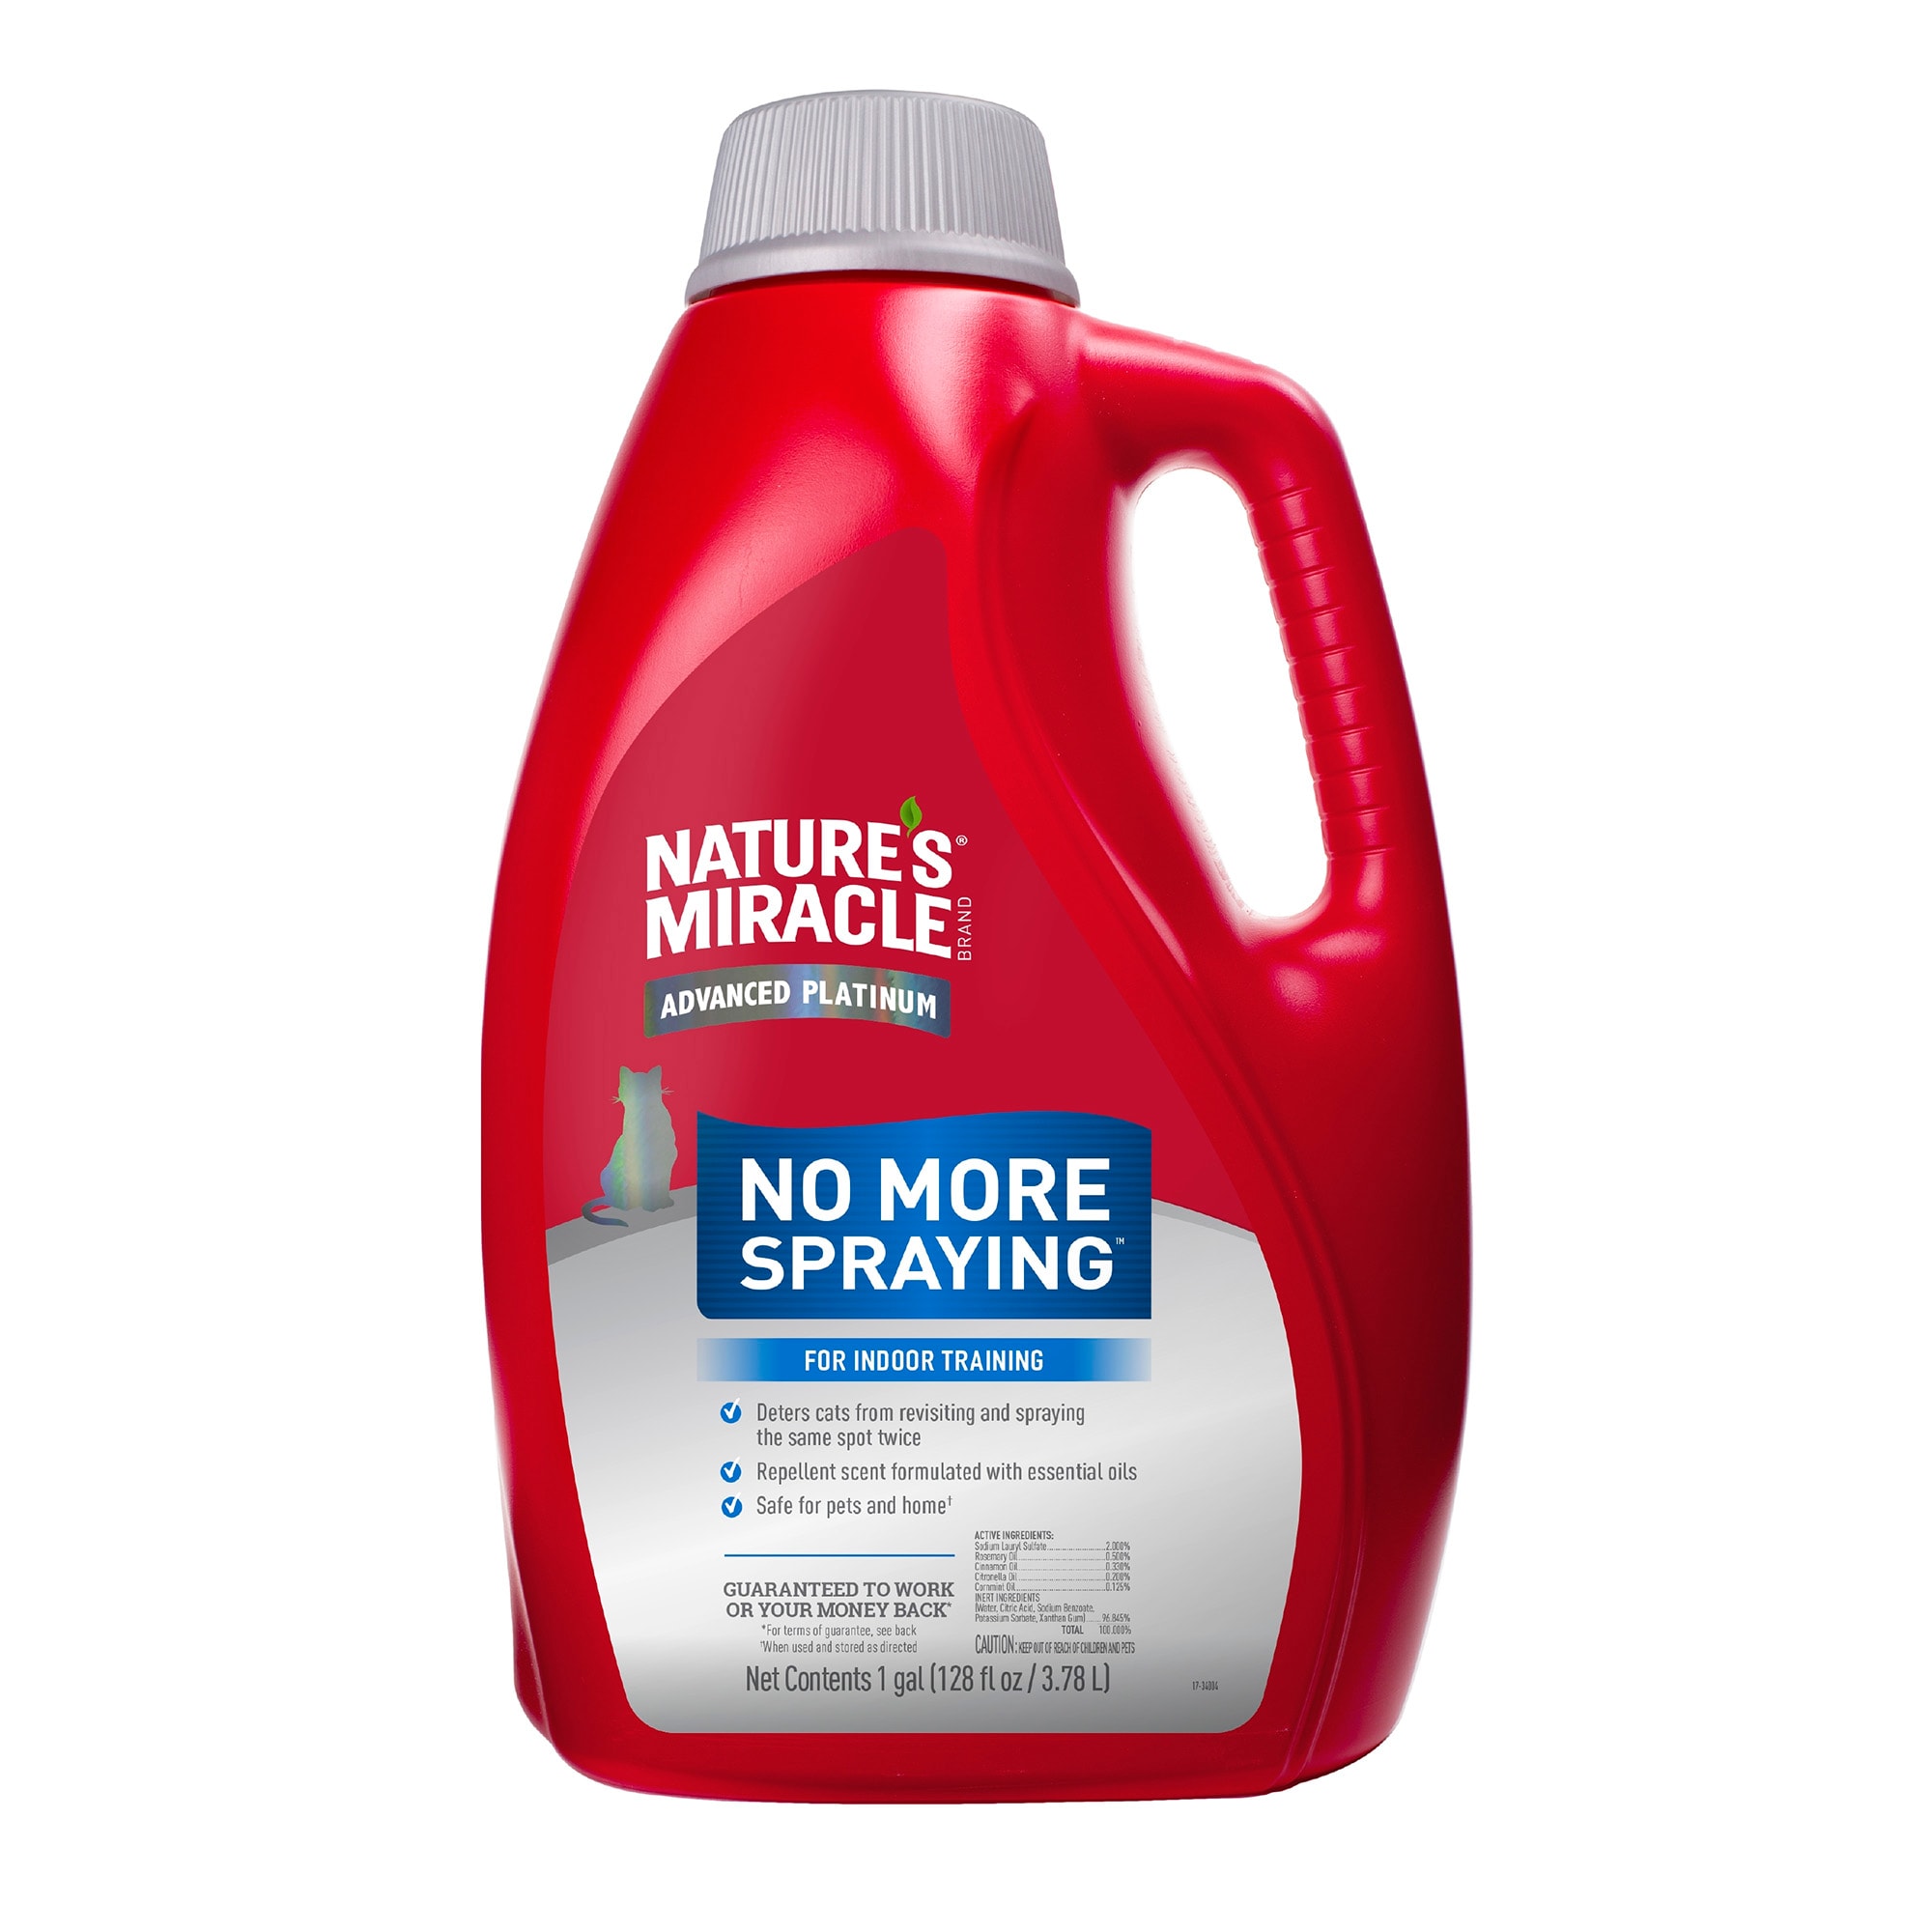 Nature's Miracle Advanced Platinum No More Spraying for Cats, 128 fl. oz.